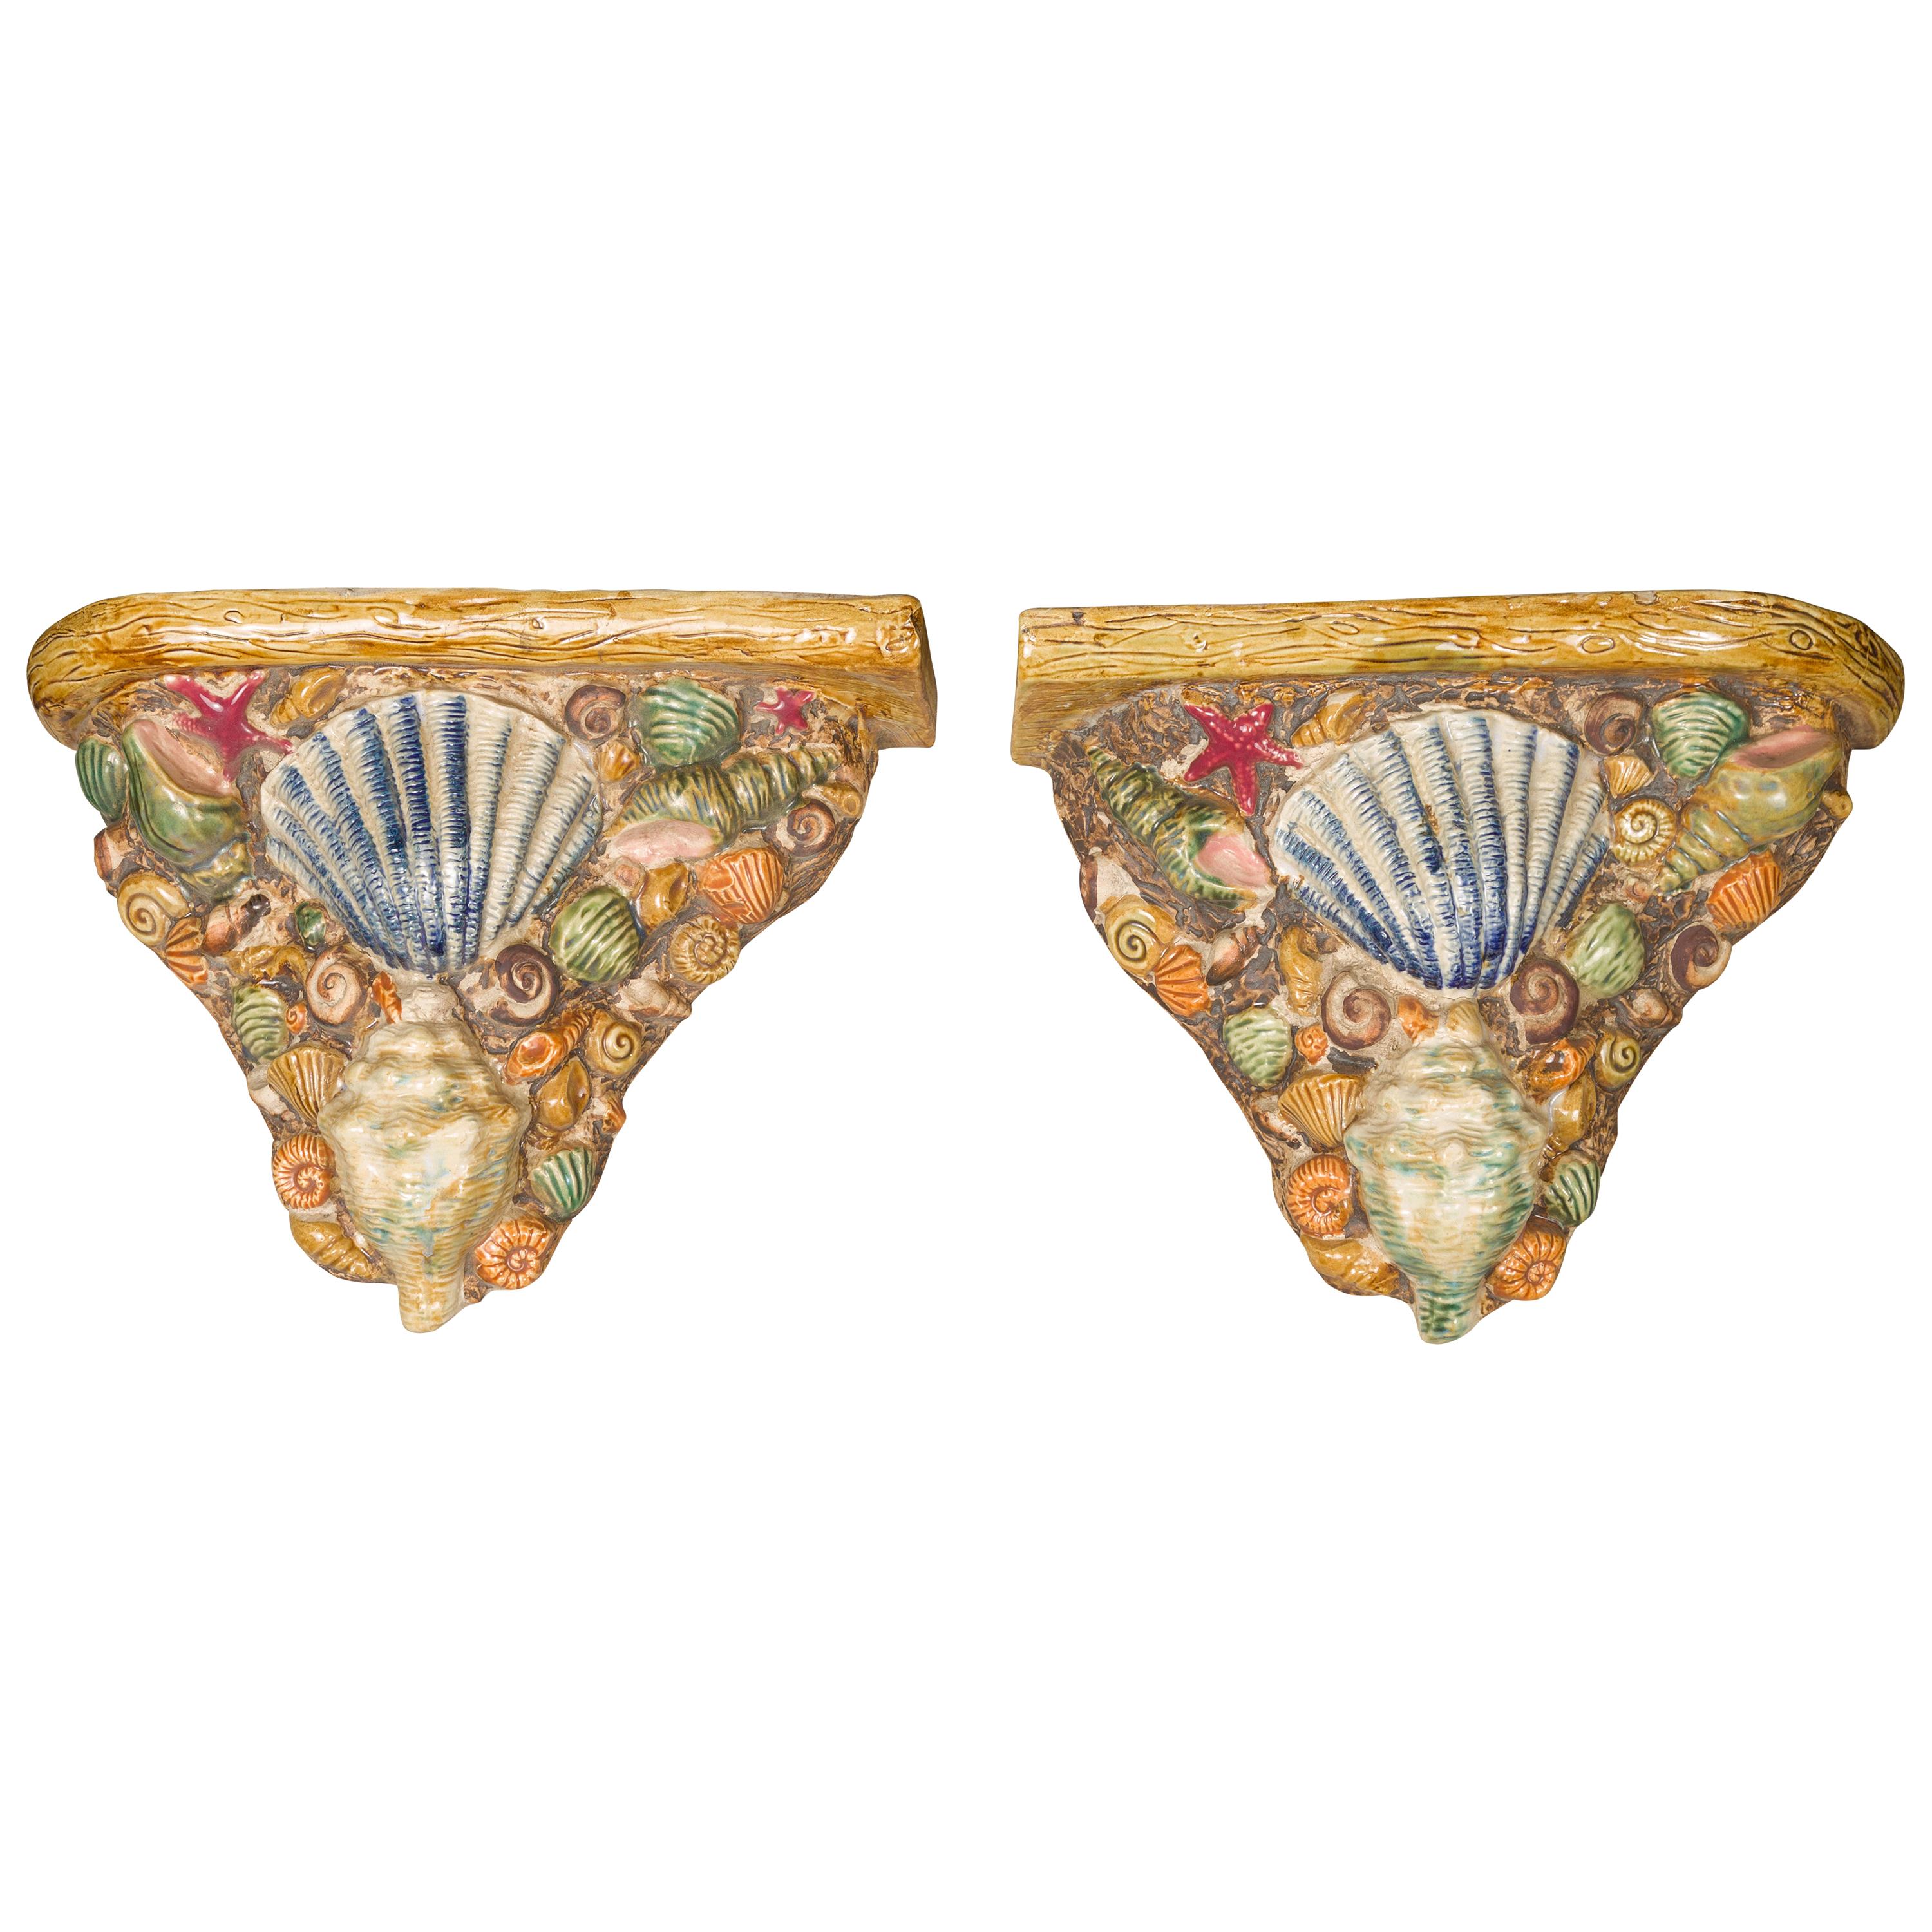 Pair of English Midcentury Majolica Brackets with Seashells and Faux-Bois Decor